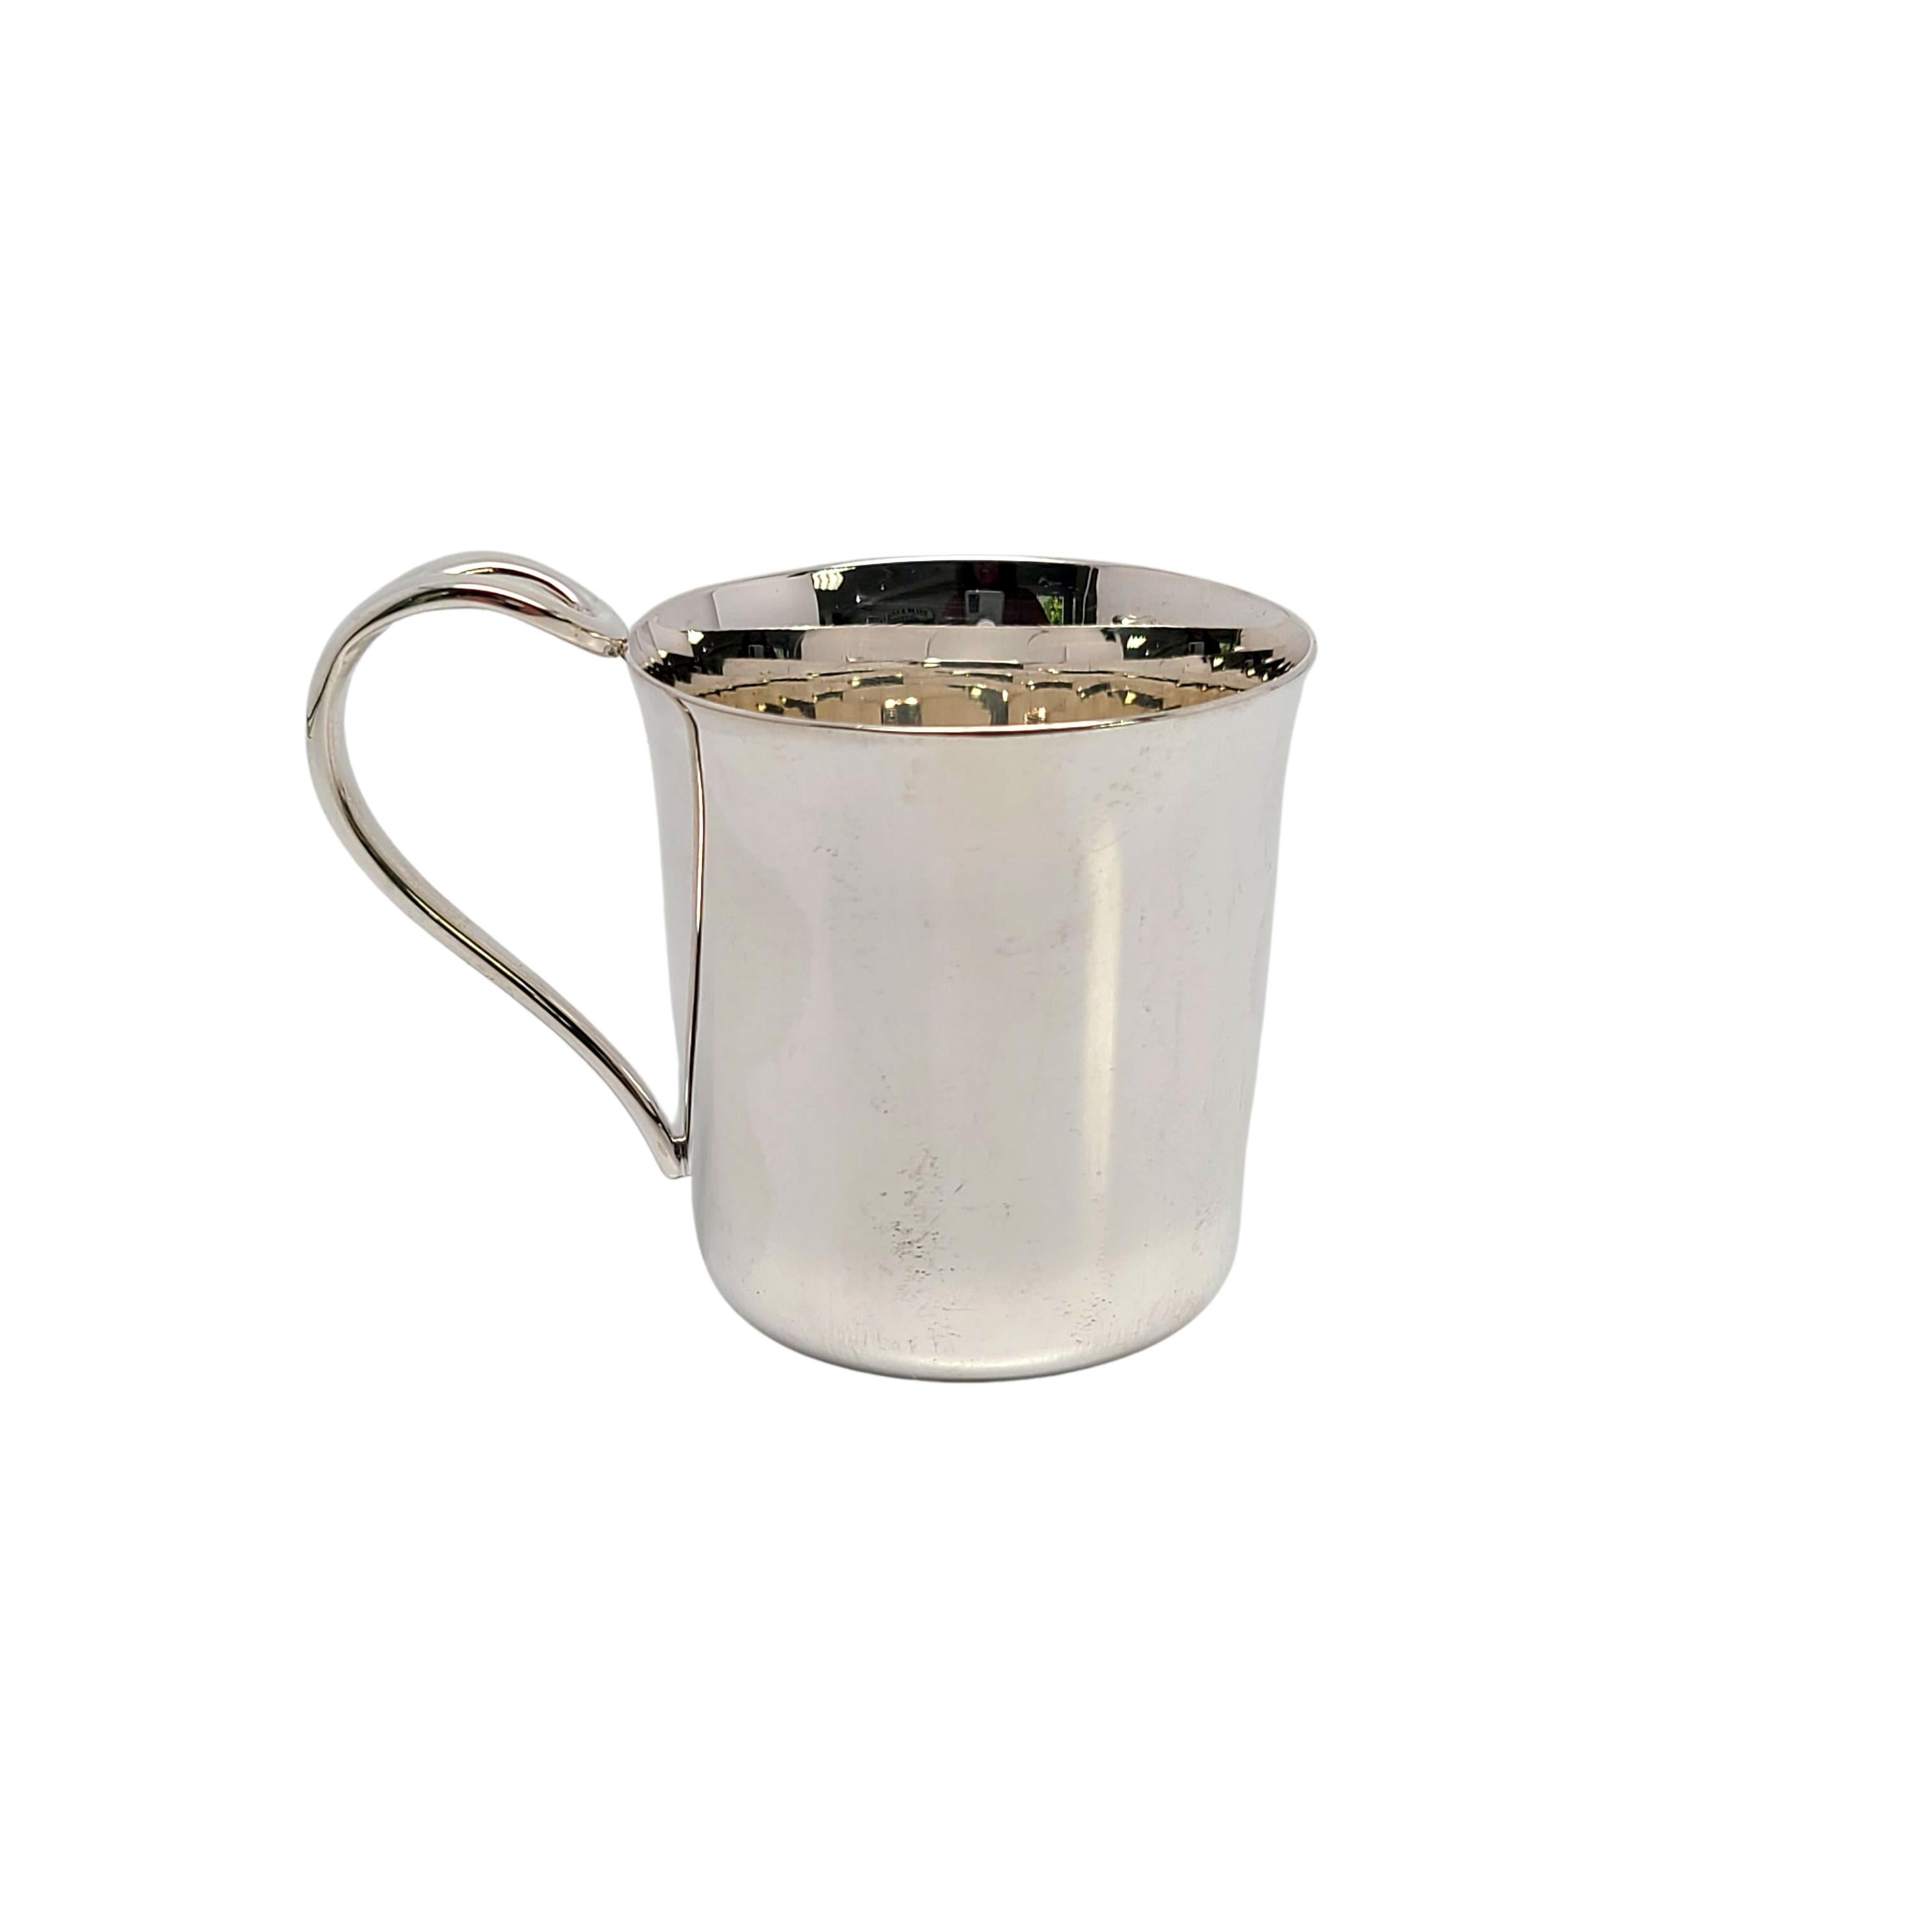 Tiffany & Co sterling silver baby cup in the Padova pattern by Elsa Petertti.

No monogram

A simple and classic child or baby cup with a curved open loop handle and highly polished finish. Does not include Tiffany & Co box or pouch.

Measures